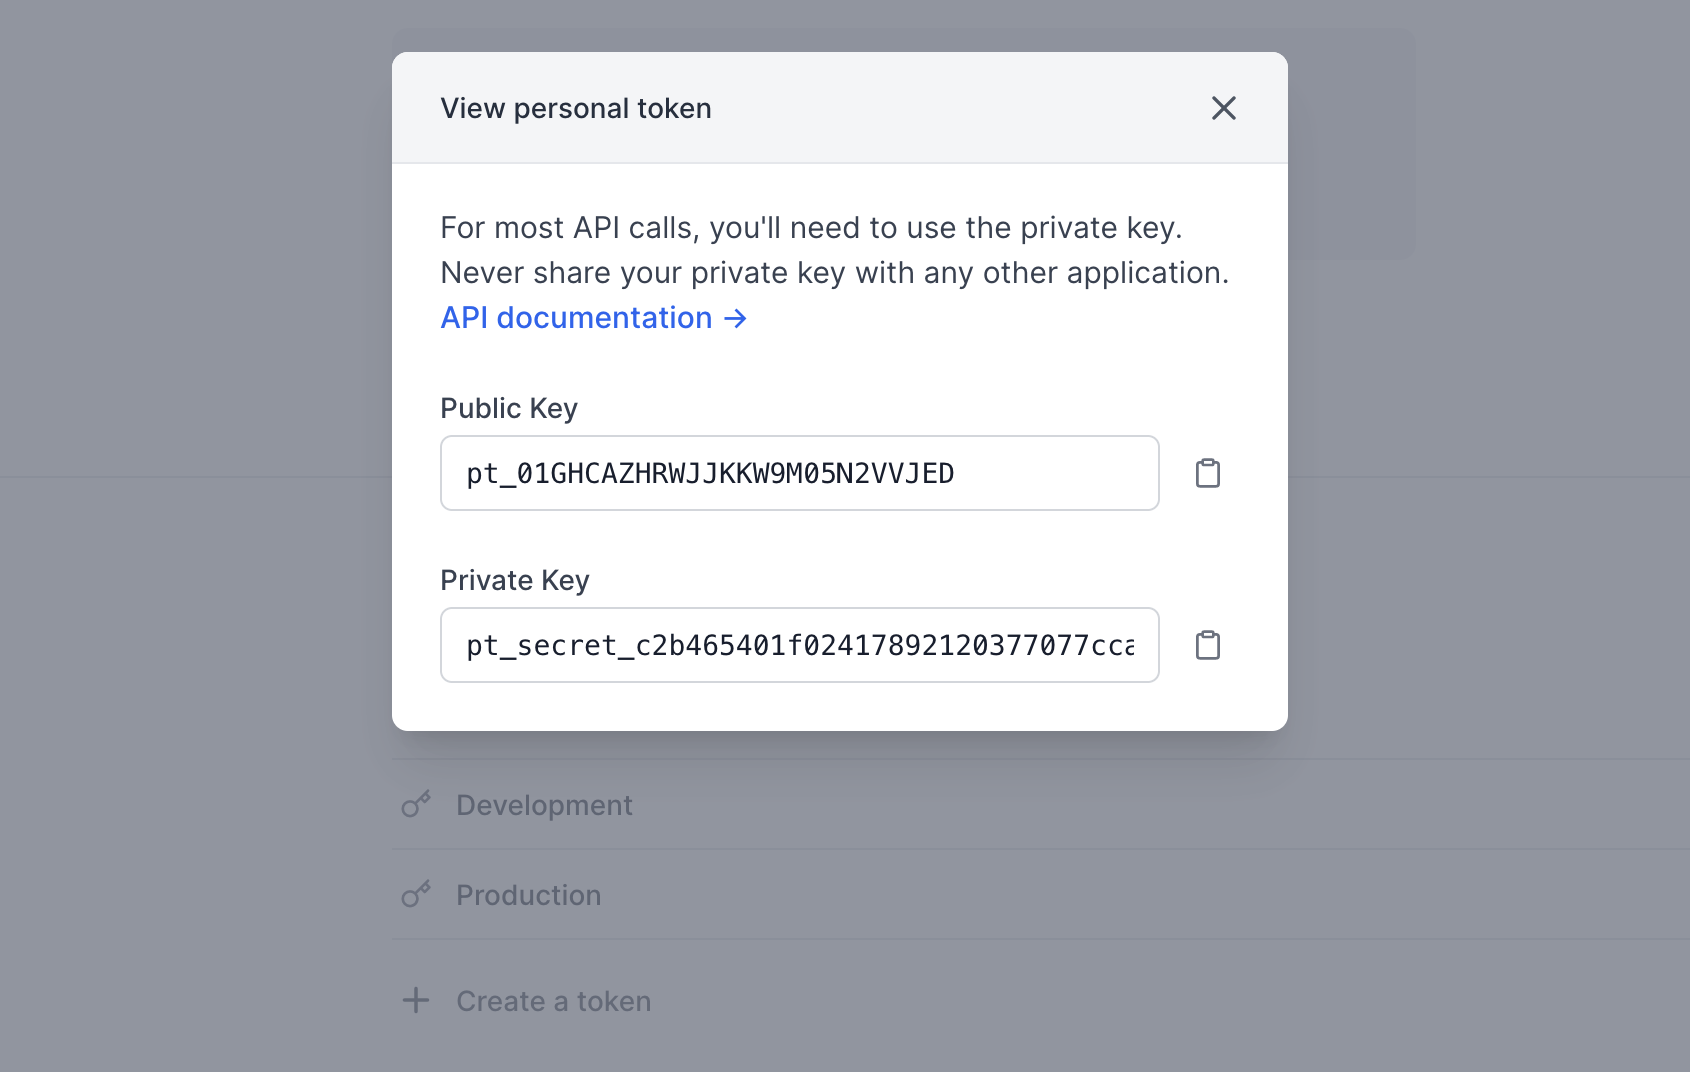 The personal access tokens interface